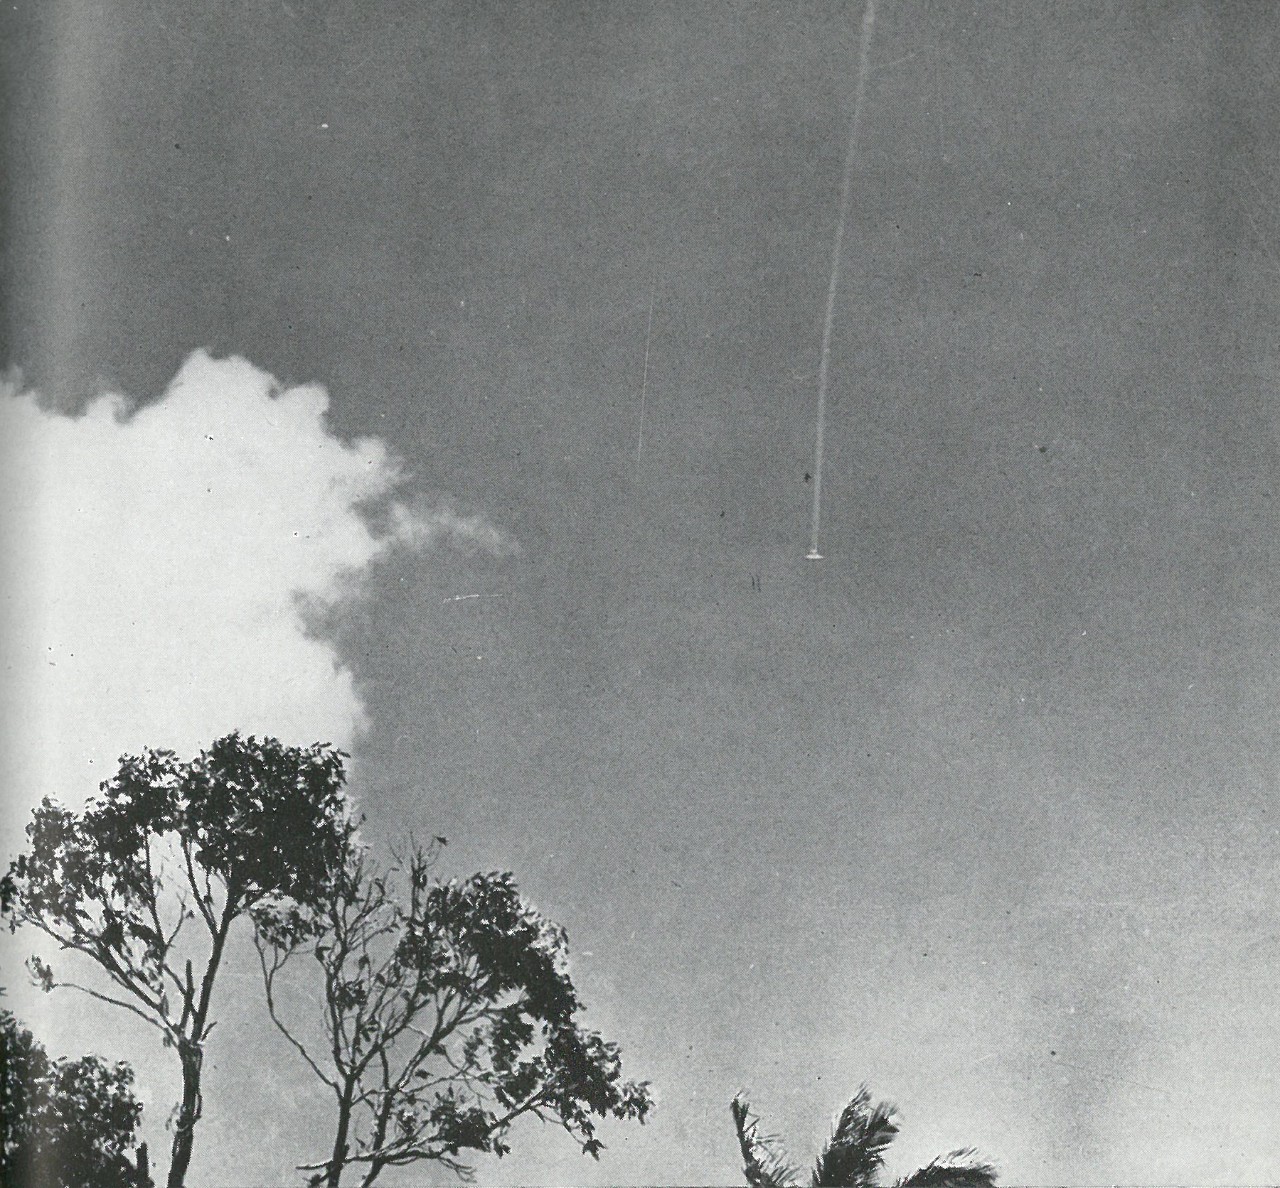 PLUMMETING DOWN, this Japanese bomber has just been hit by Grumman Wildcat fighters of the 1st Marine Air Wing.